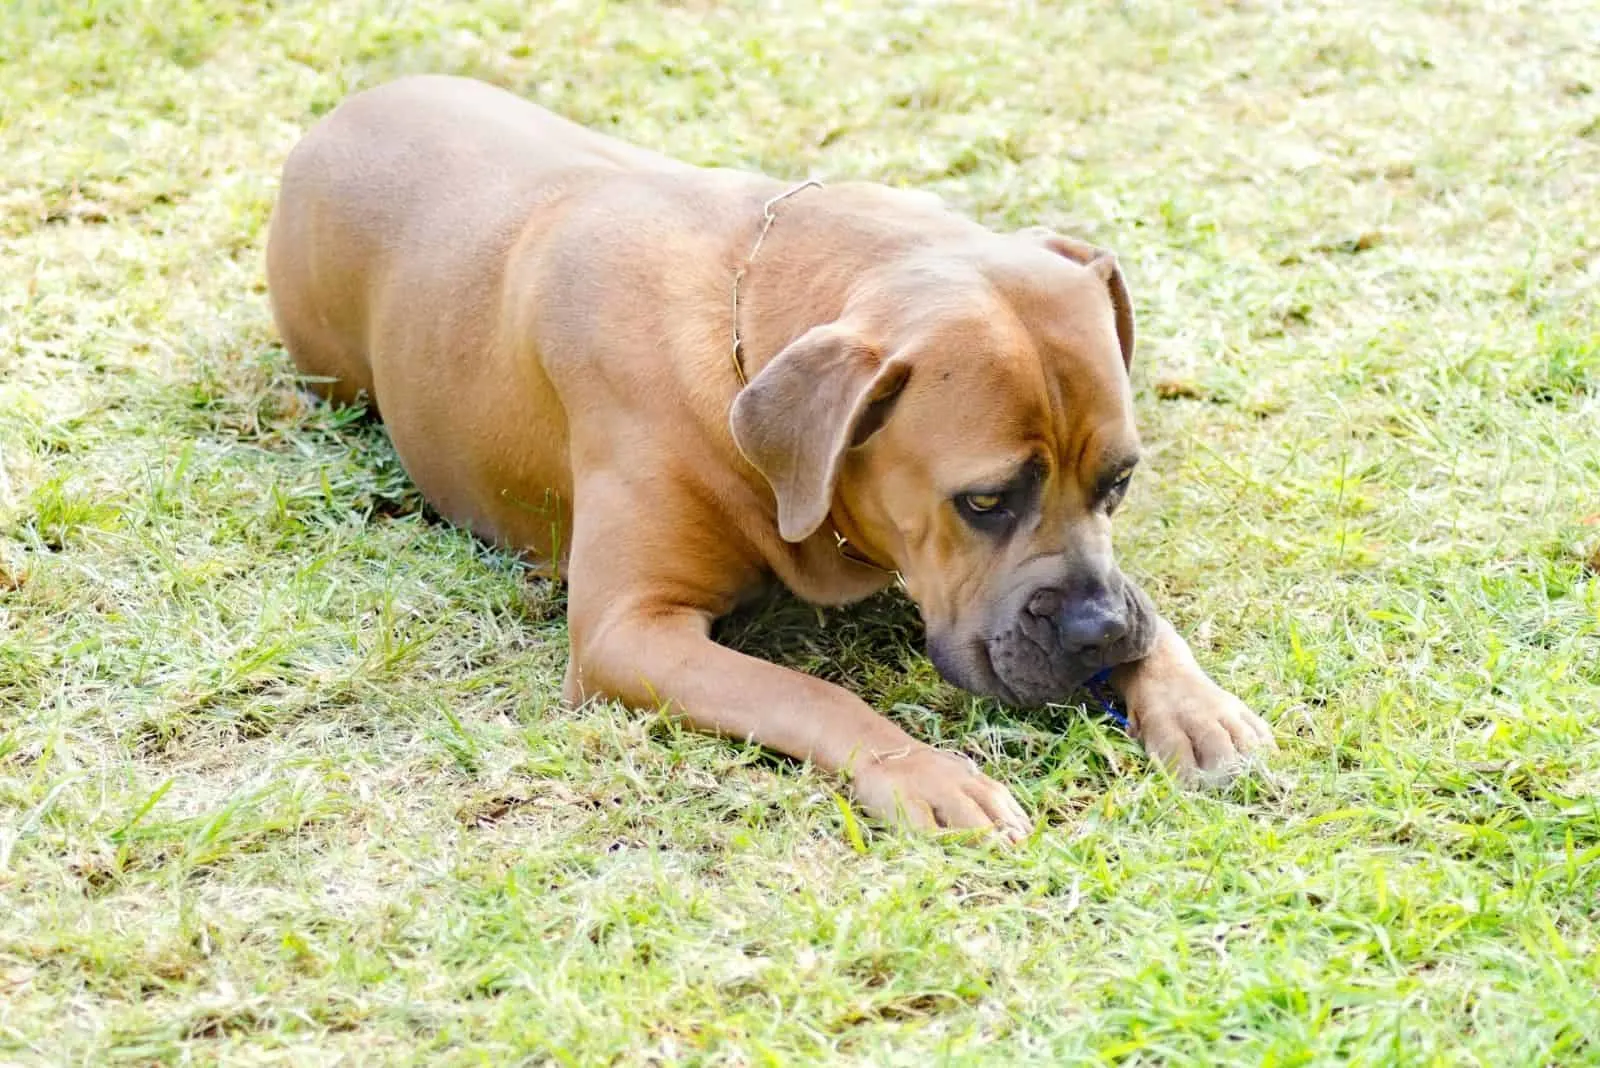 cane corso mixed breed dog eating grass while lying down